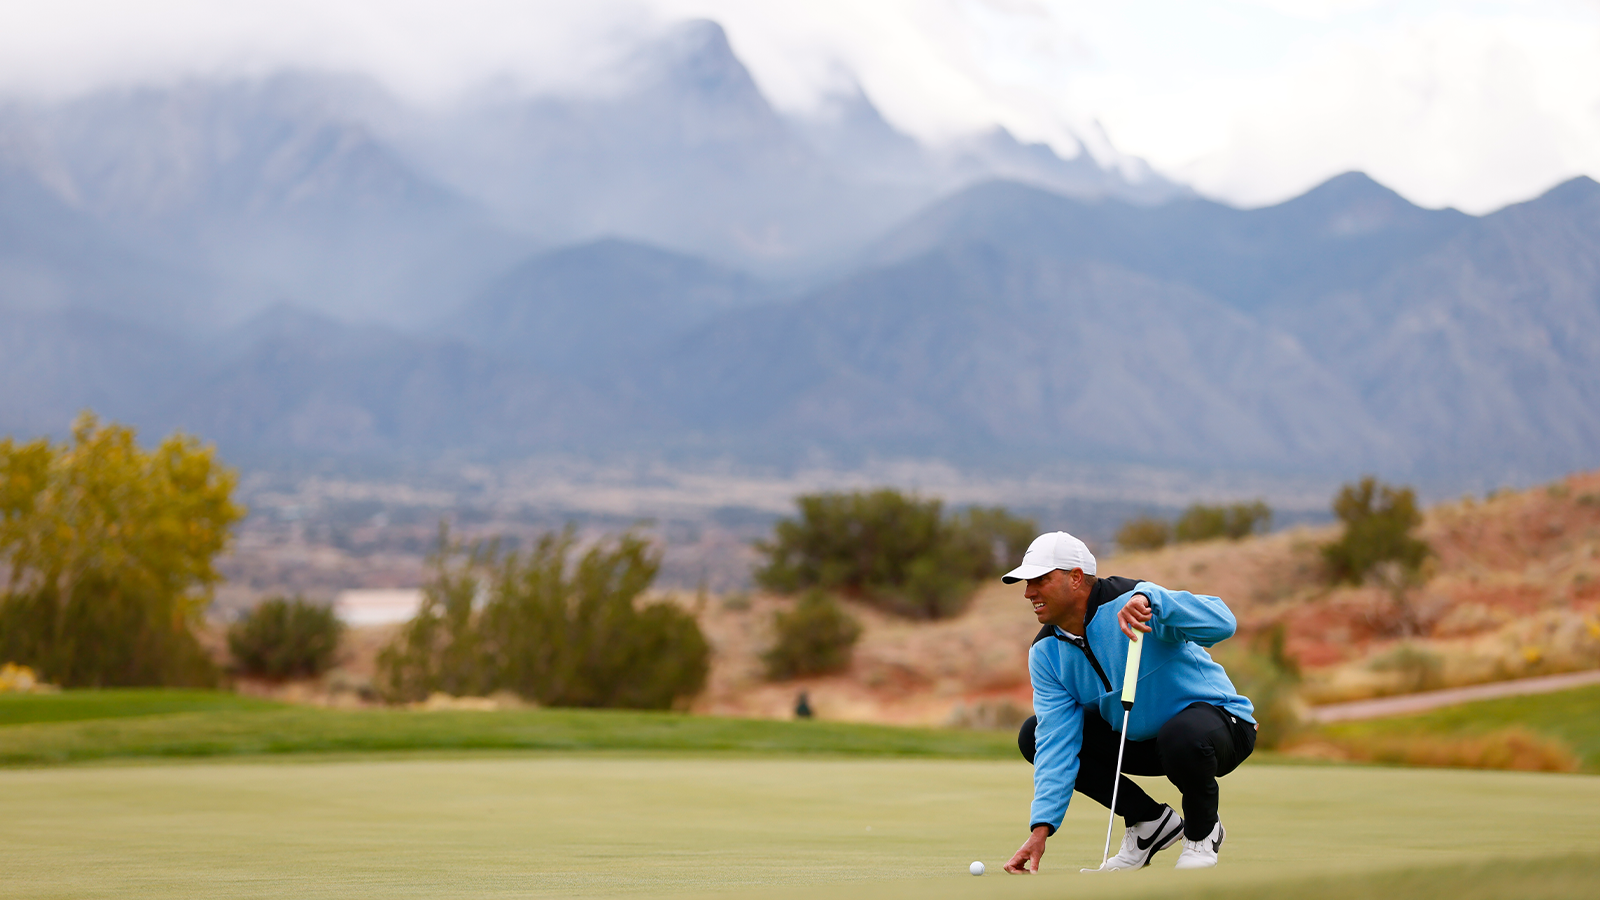 Matt Schalk reads his putt on the sixth hole during the final round of the 34th Senior PGA Professional Championship at Twin Warriors Golf Club on October 16, 2022 in Santa Ana Pueblo, New Mexico. (Photo by Justin Edmonds/PGA of America)